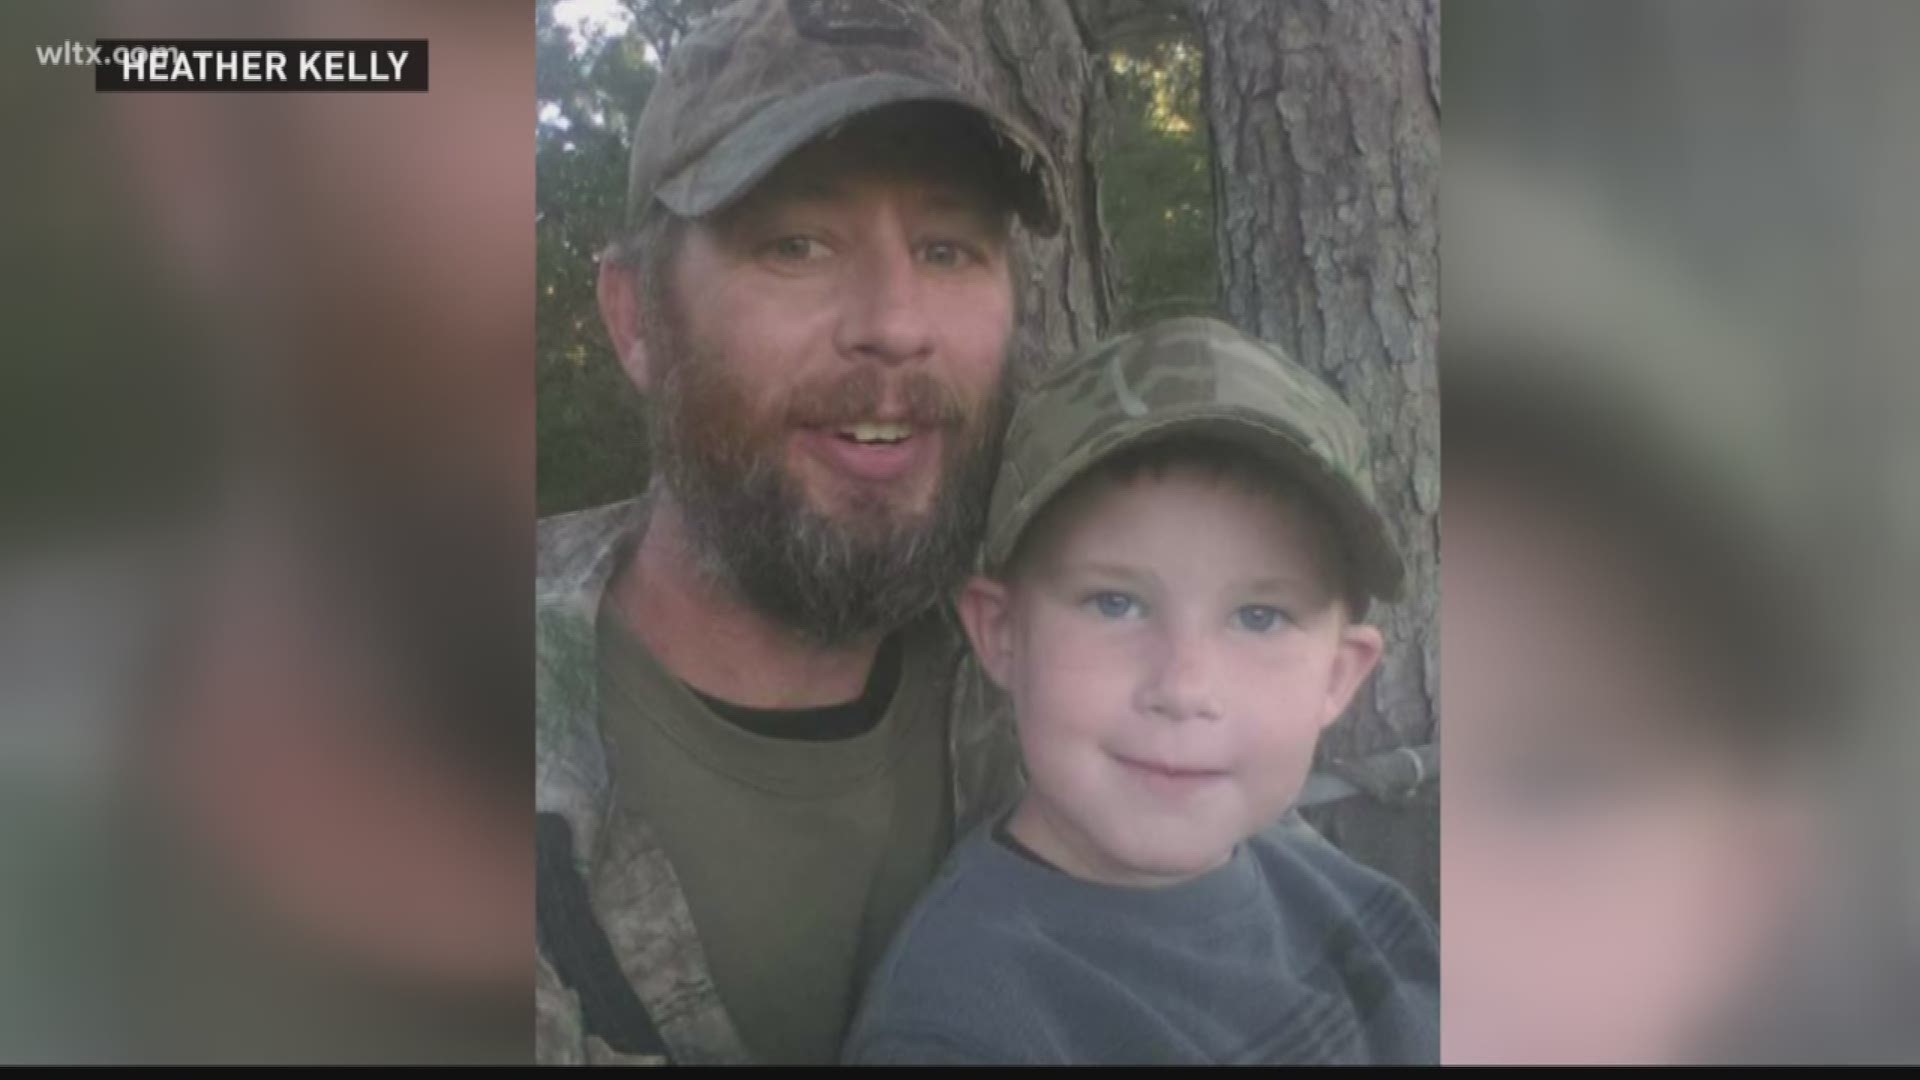 The body of Adam Ray Davis was found a year later after deputies received an anonymous letter with GPS coordinates, which led them to a wooded area in Lee County.